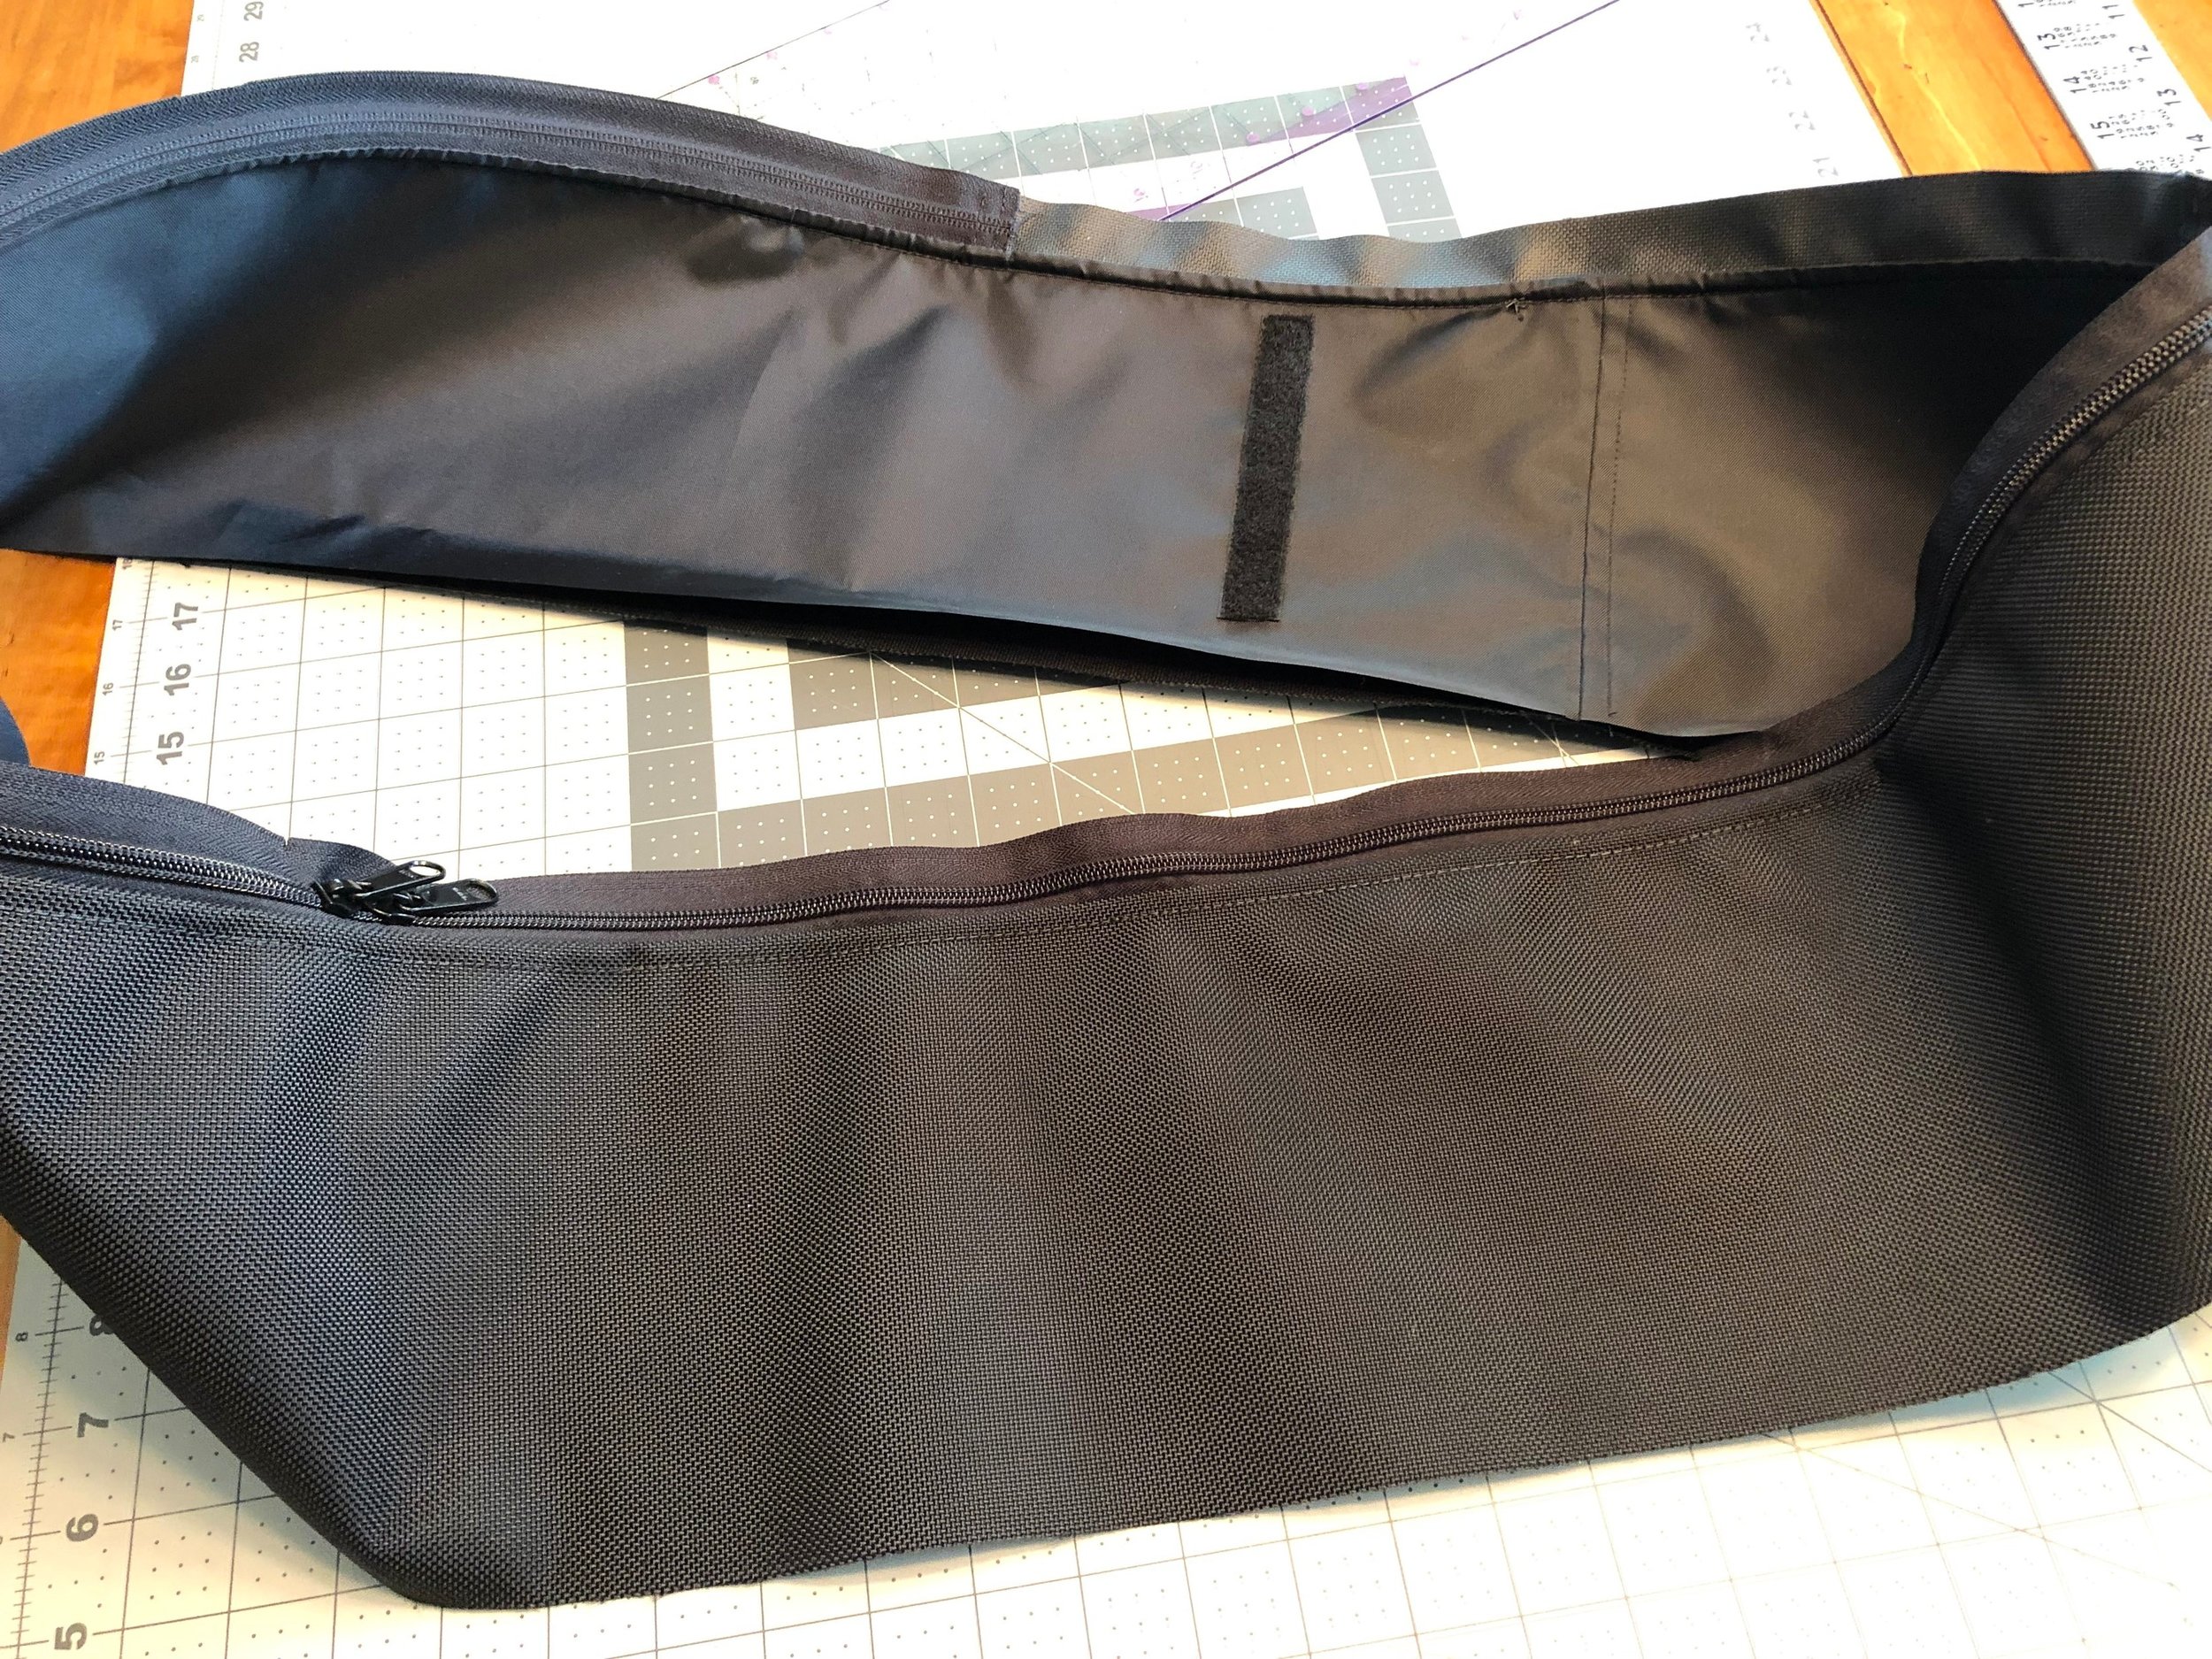  Turn the gusset out and topstitch around the zipper seam to hold the lining in place. 